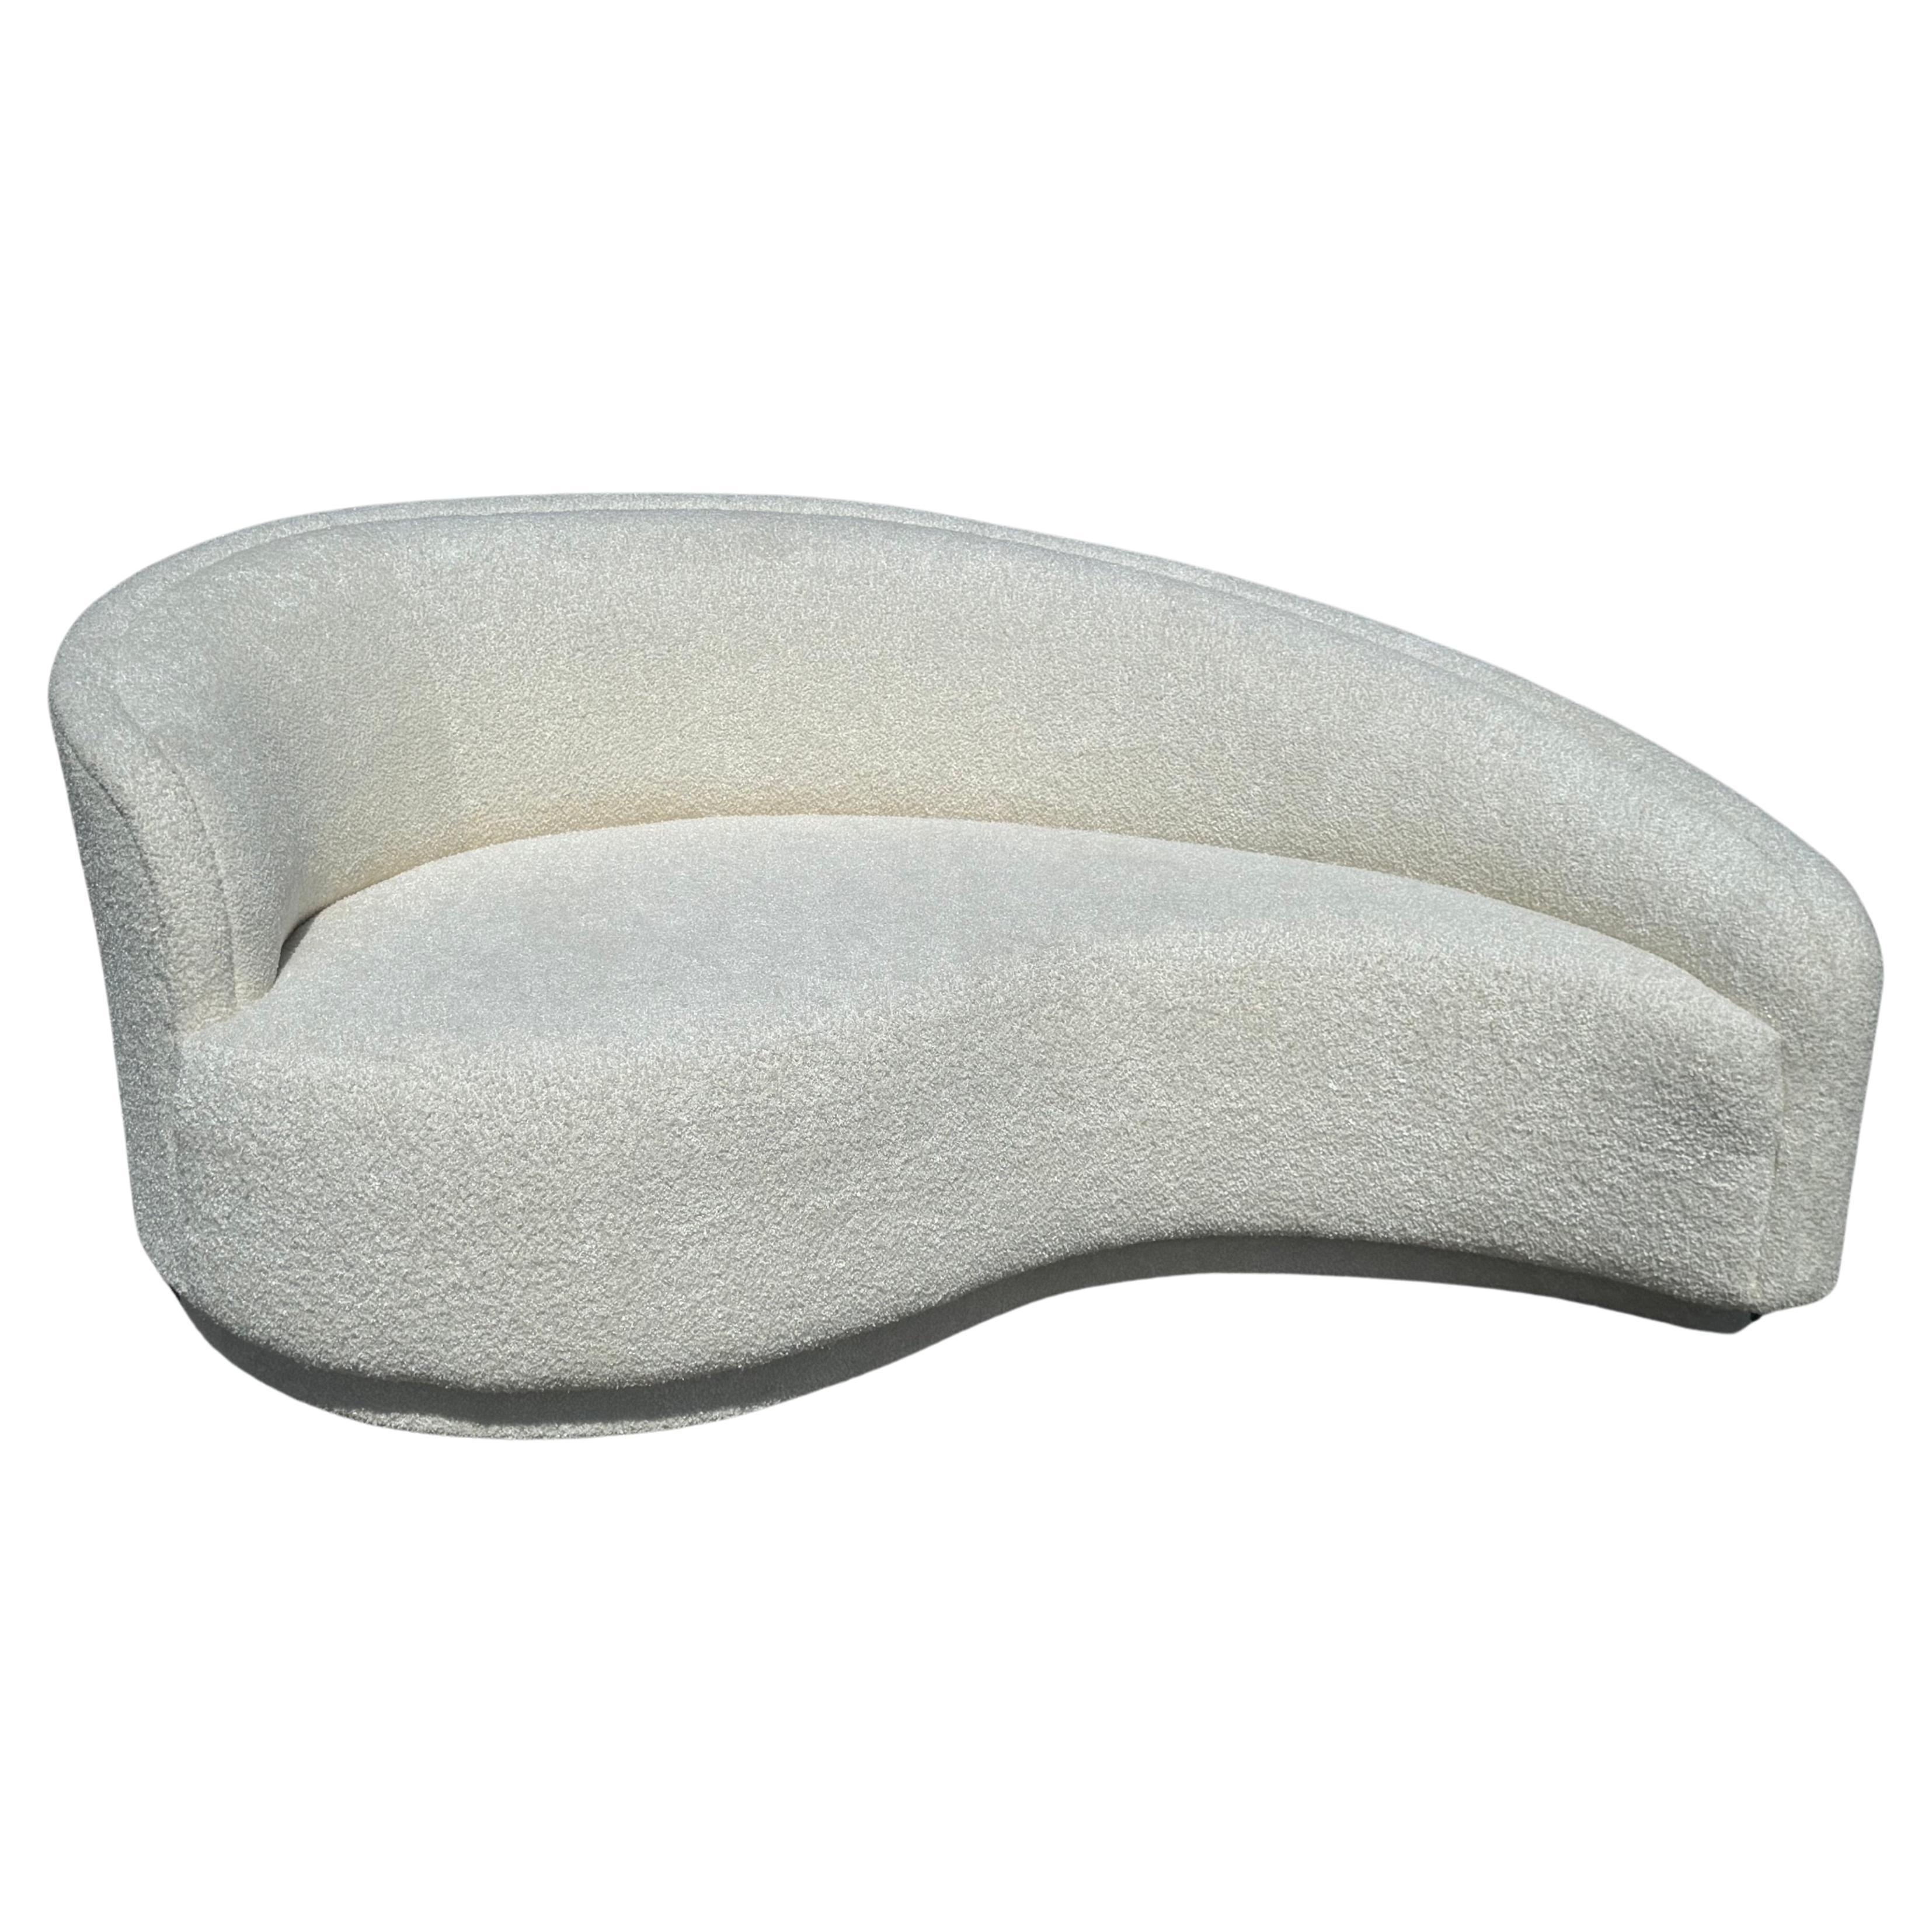 1980s Glamours Curved Sofa - Chaise by Vladimir Kagan for Weiman in White Bouclé For Sale 1